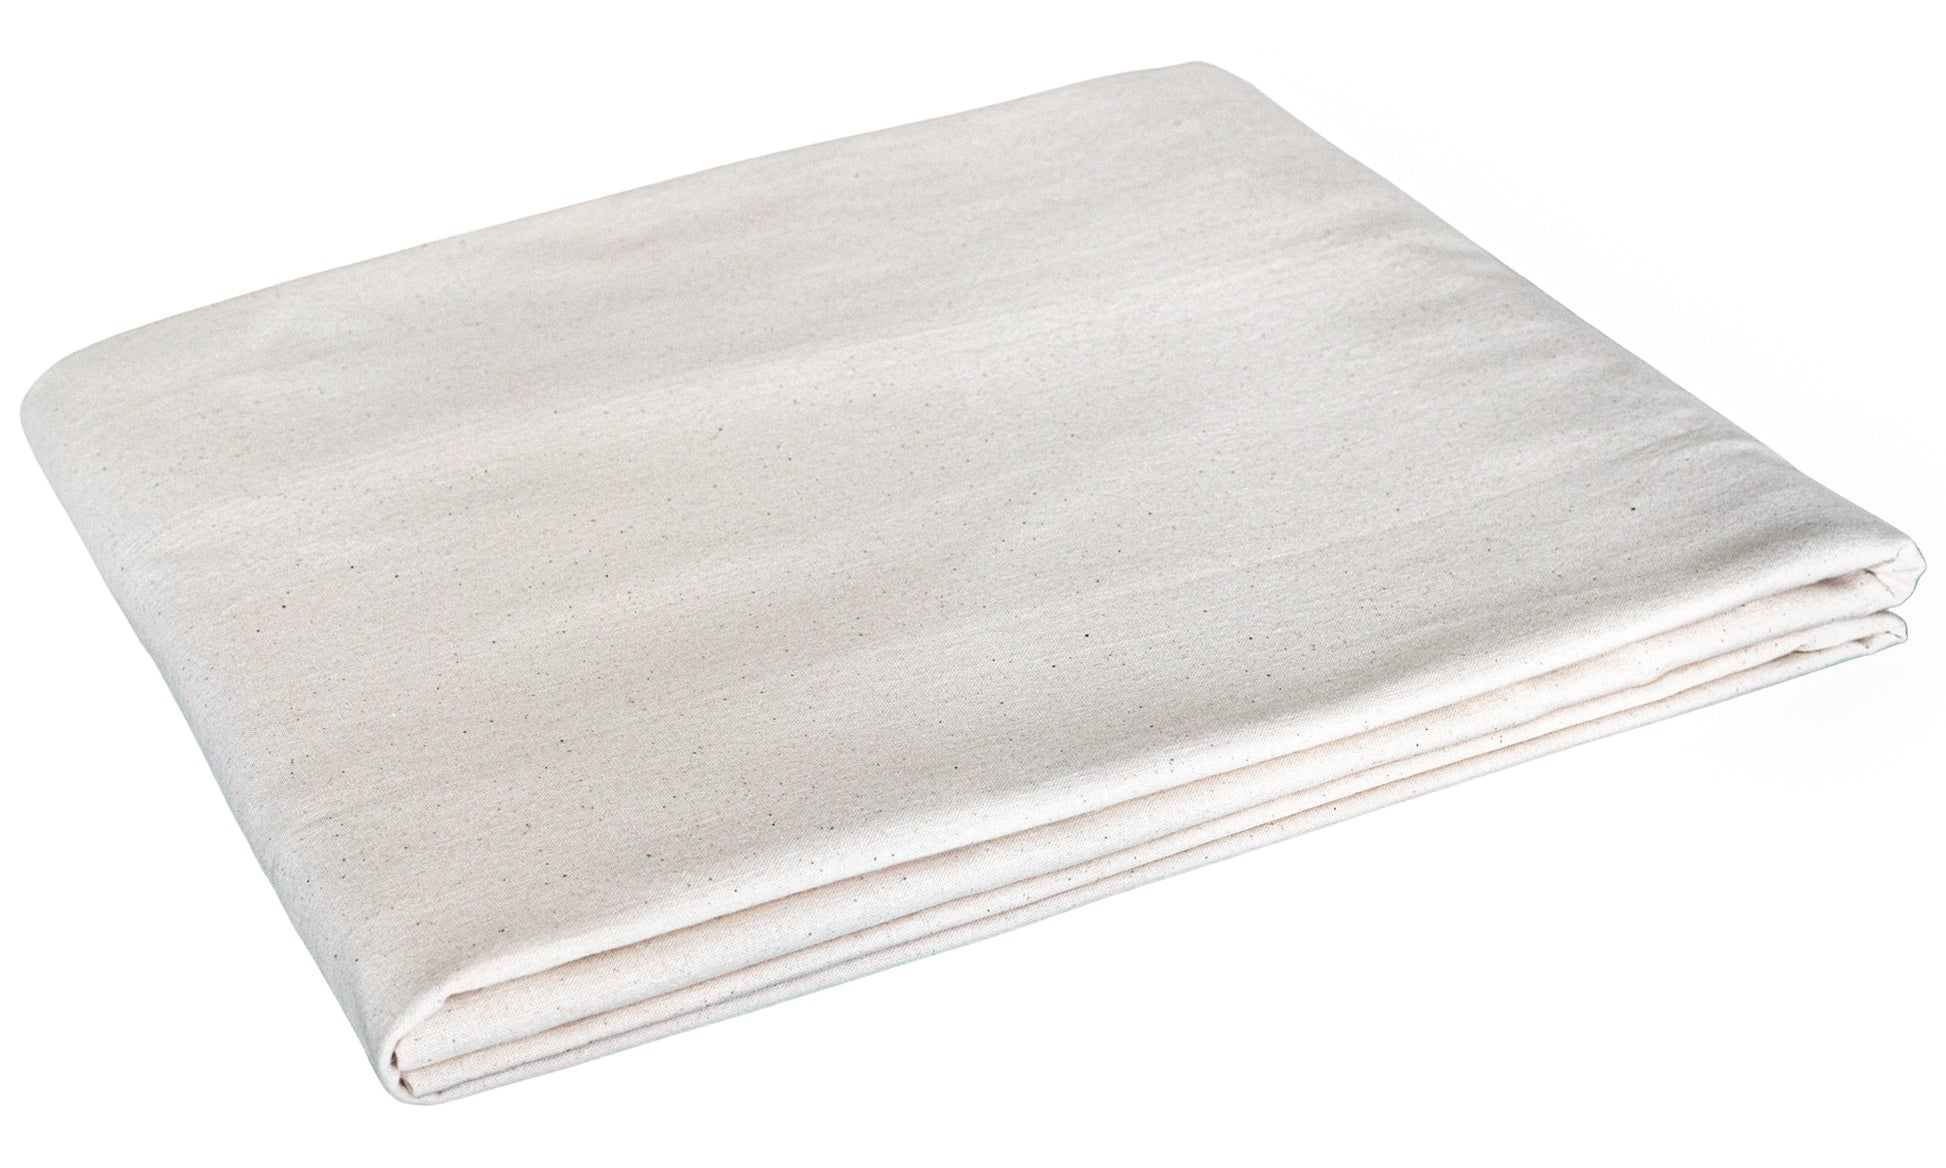 Exfoliating muslin cloth made of certified organic cotton – Marina Miracle